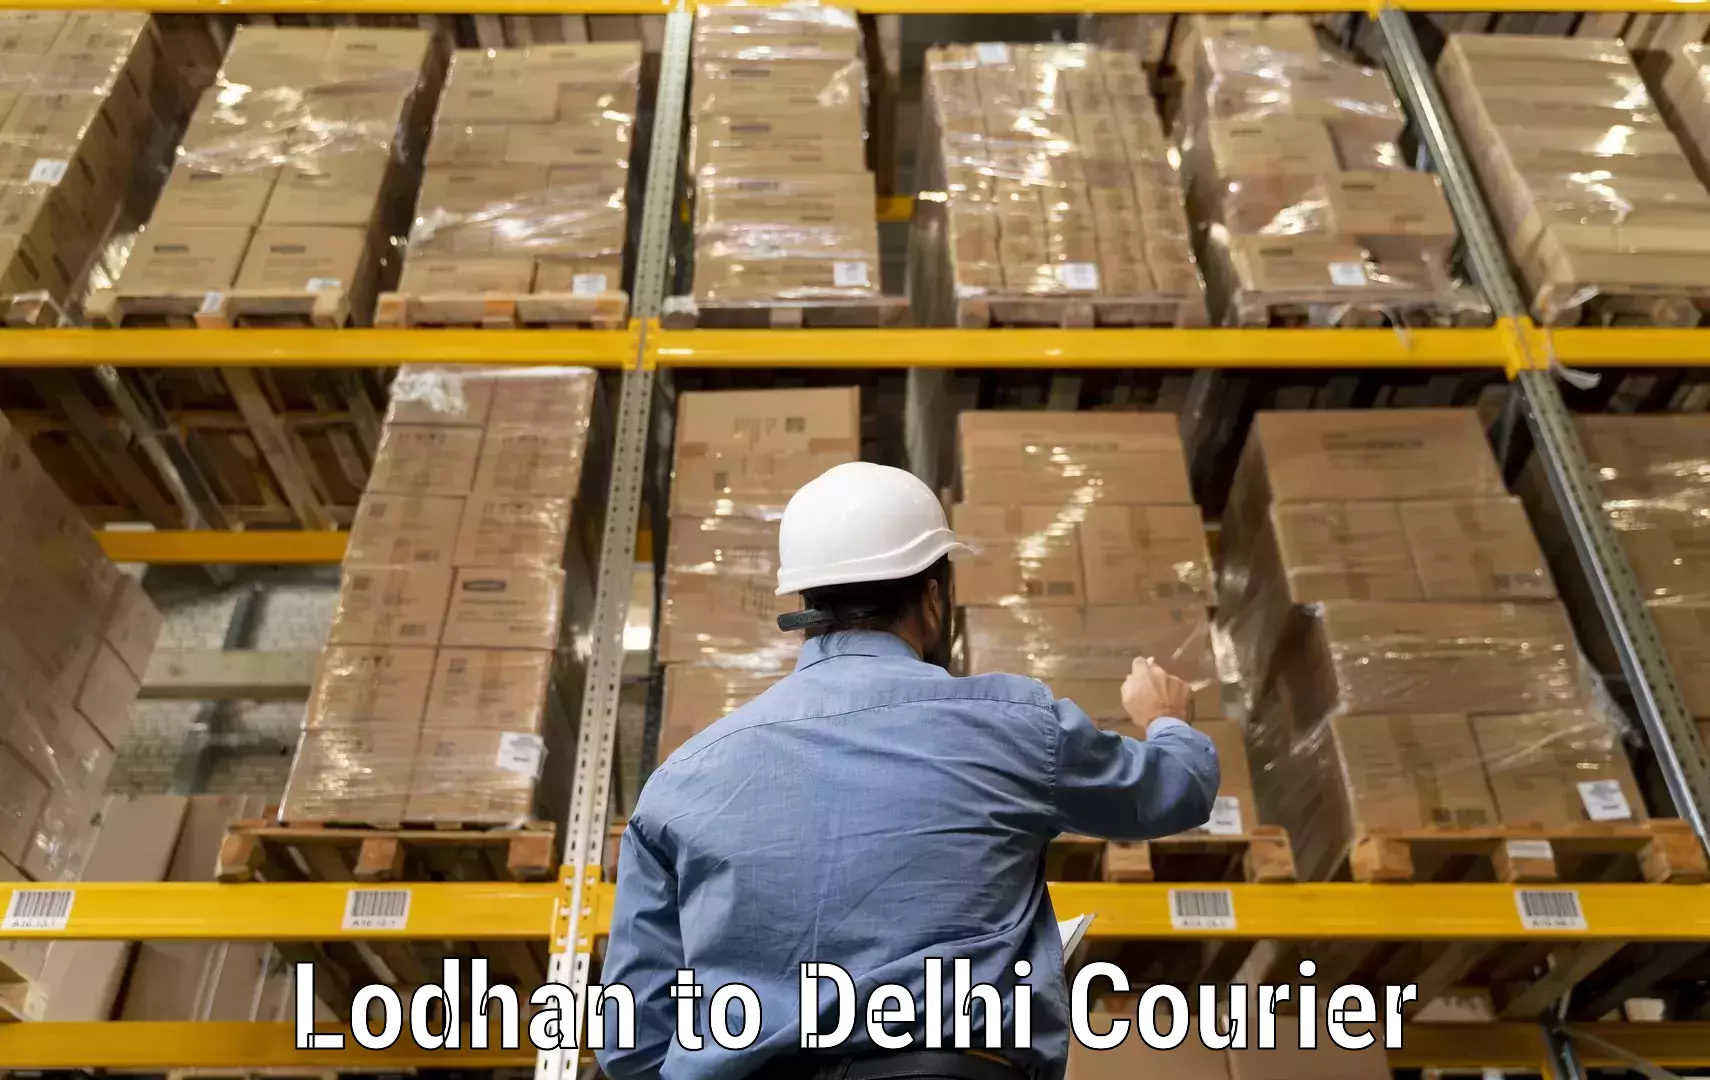 Comprehensive shipping services Lodhan to University of Delhi